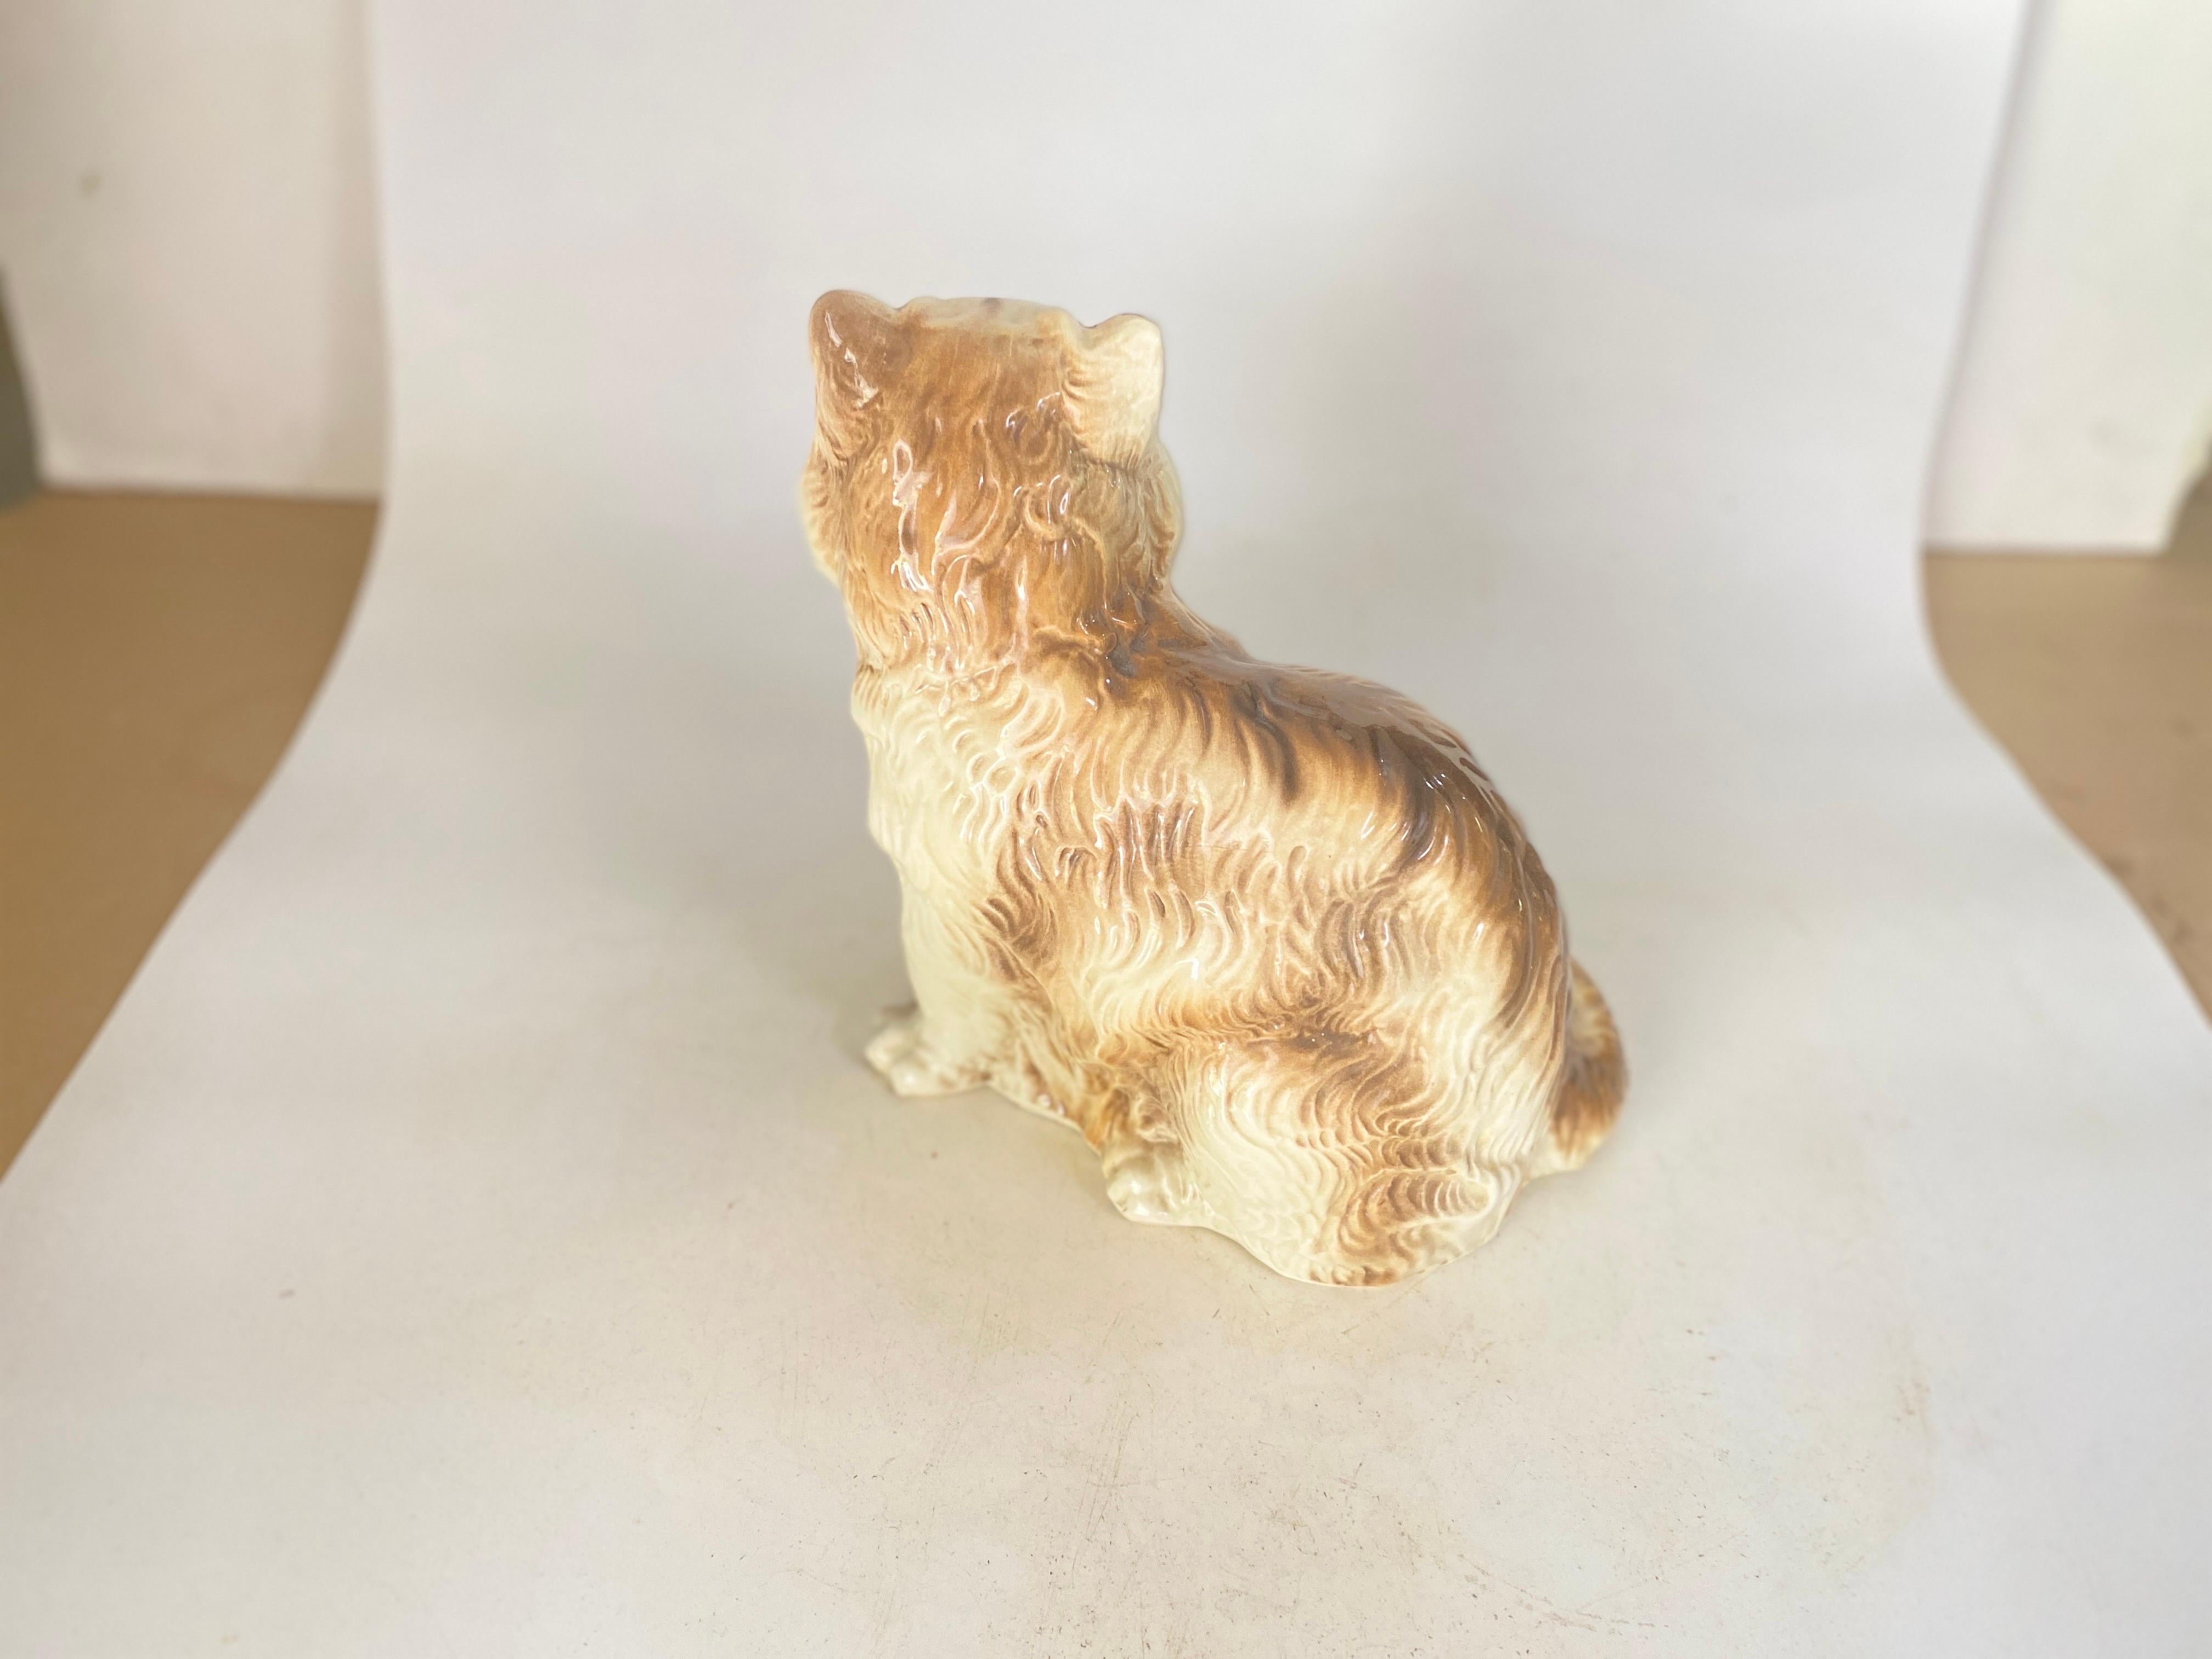 Sculptures of Larges Cats Italian Ceramic  from the 1970s Set of 2 For Sale 6